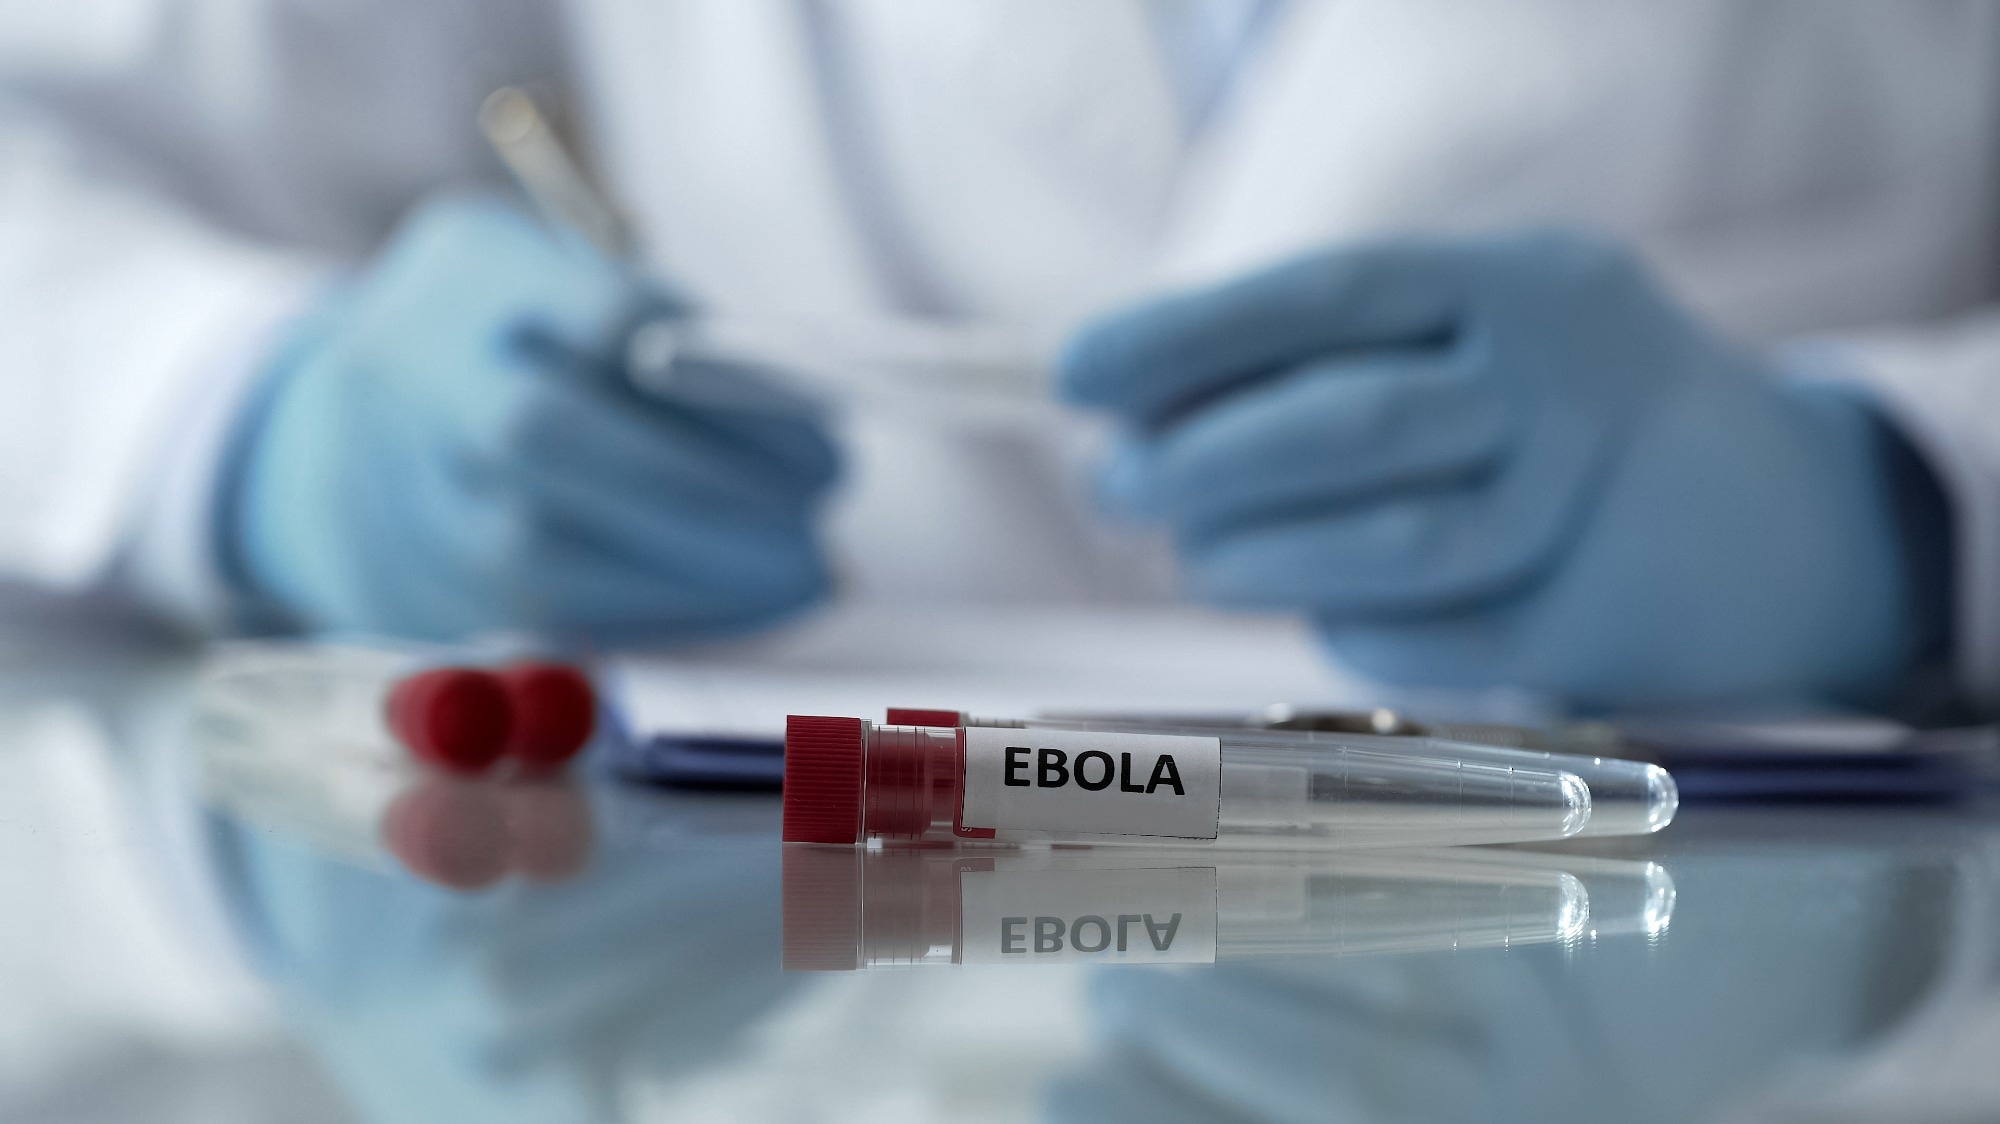 Study: Higher local Ebola incidence causes lower child vaccination rates. Image Credit: Motortion Films/Shutterstock.com